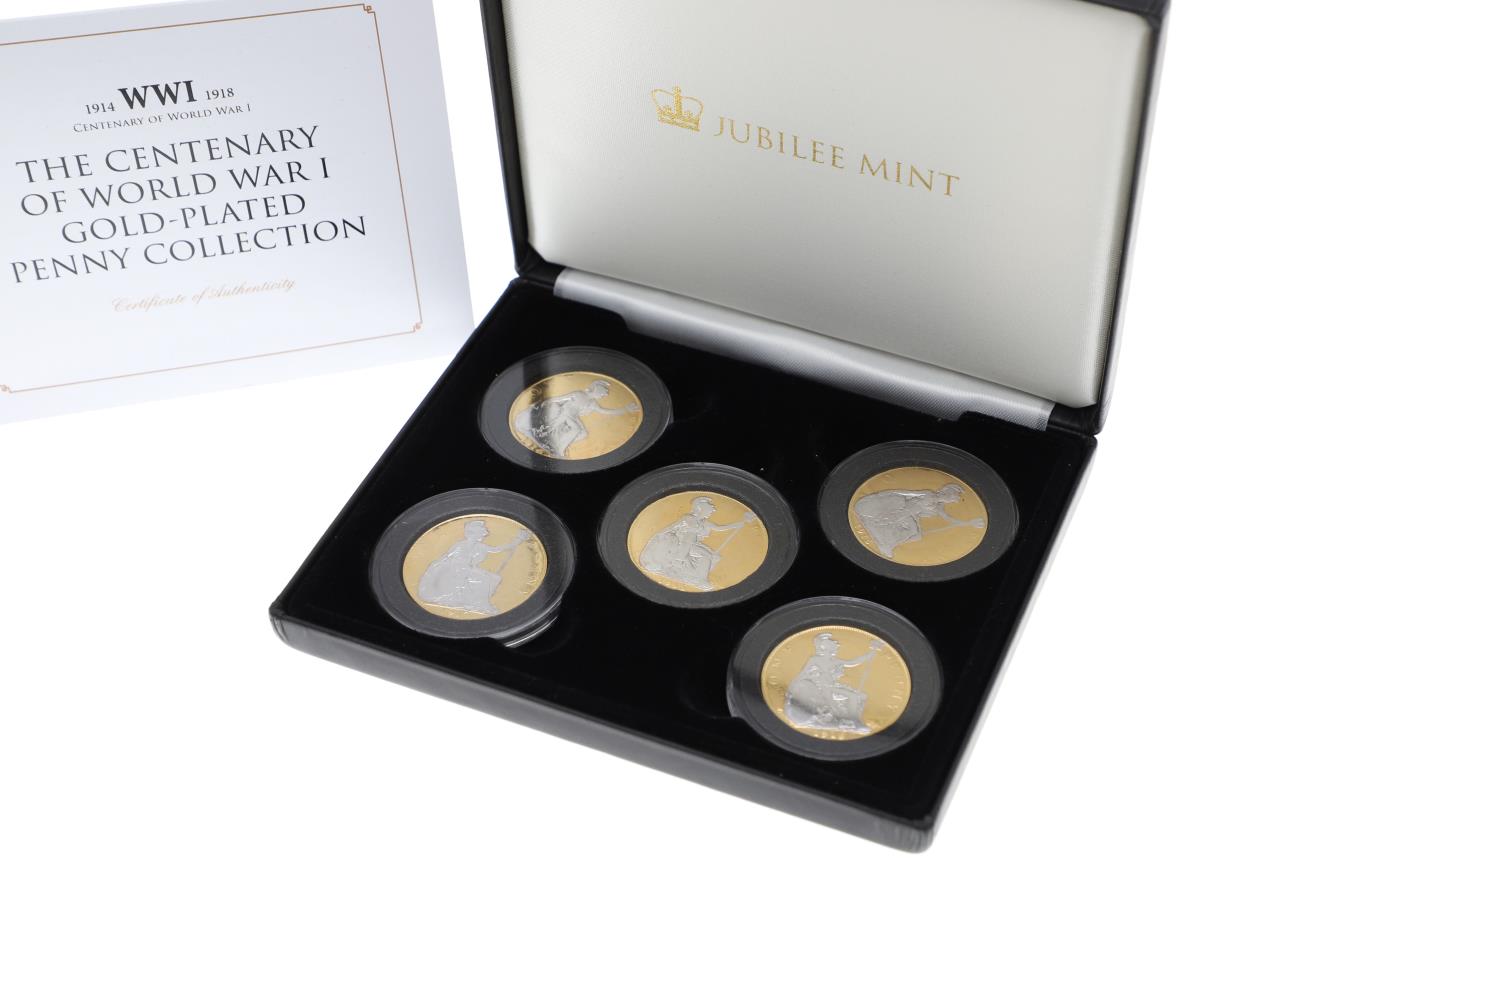 A COLLECTION OF JUBILEE MINT AND OTHER SETS OF PRE-DECIMAL COINS IN PRESENTATION CASES. - Image 5 of 13